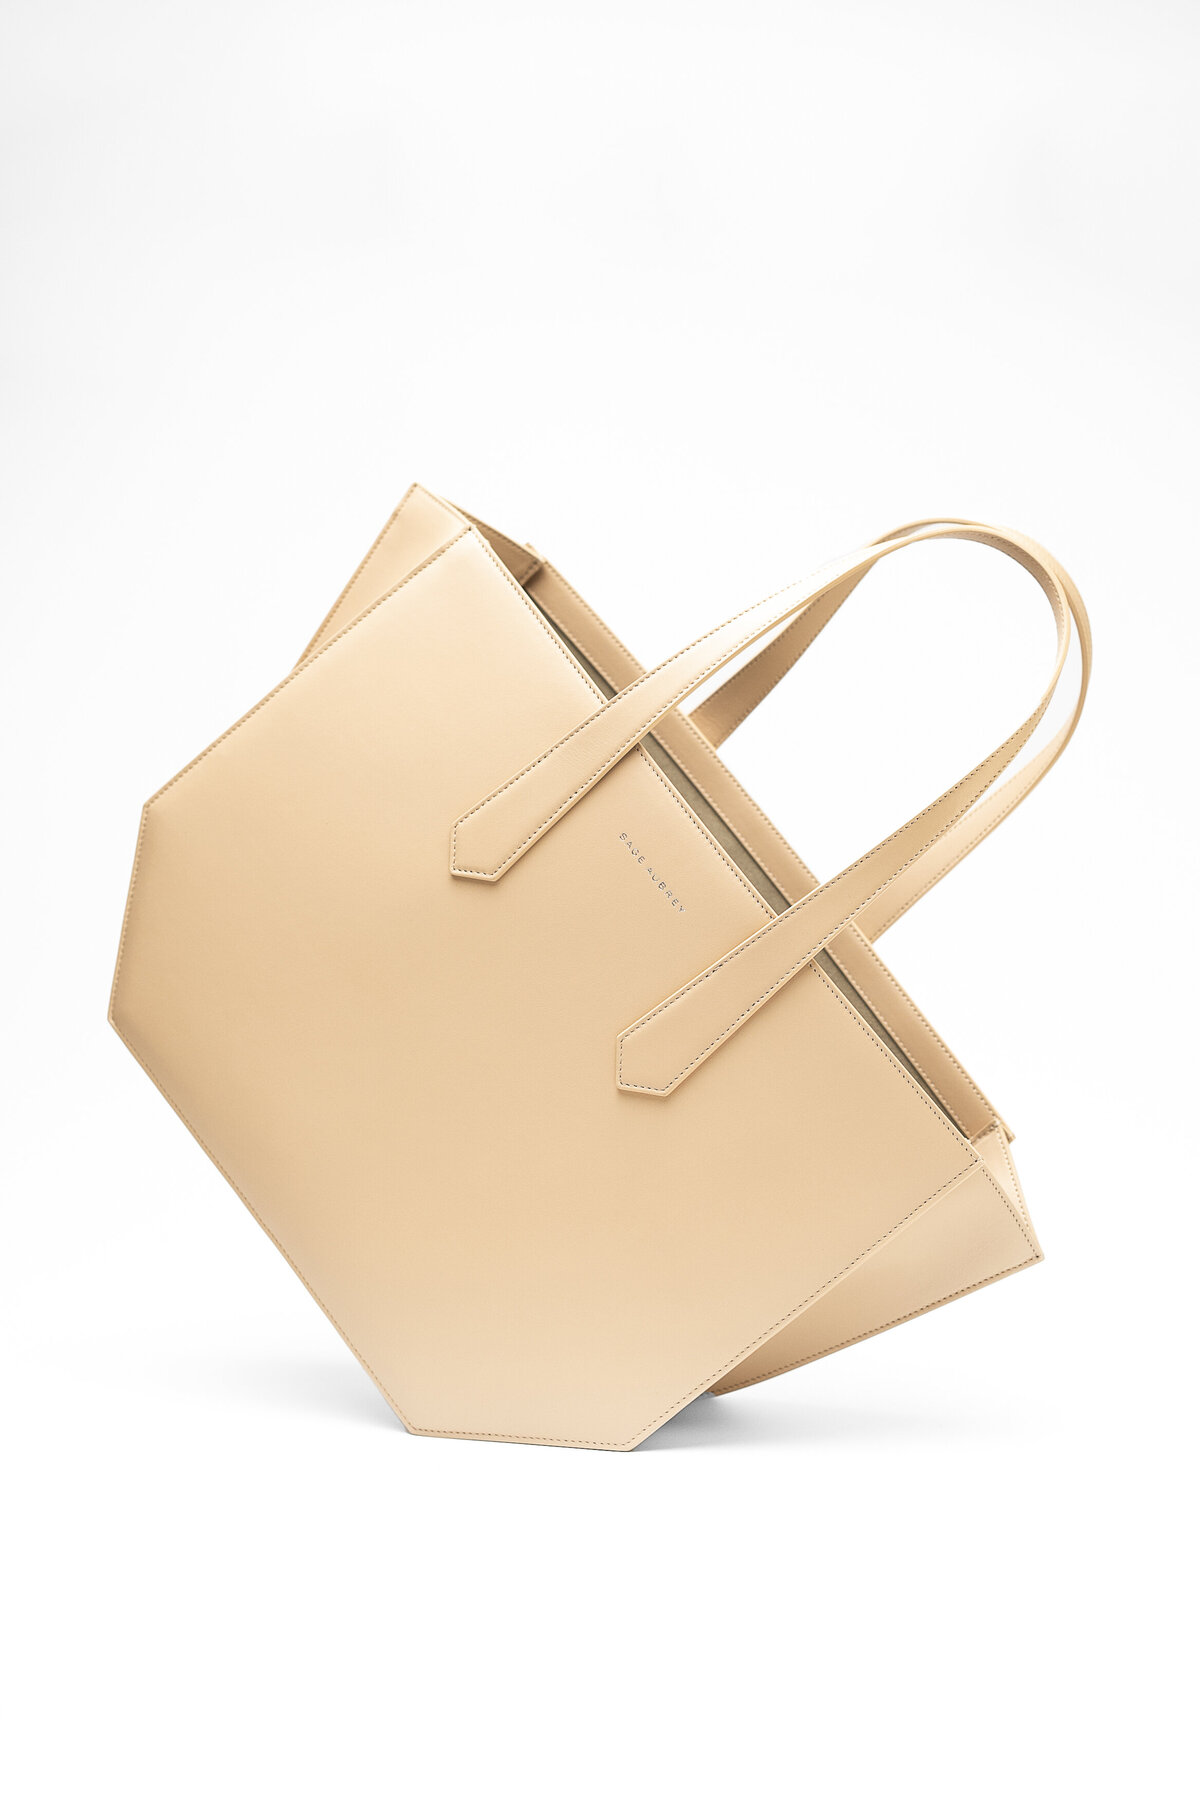 Sage Aubry geometric leather tote in tope